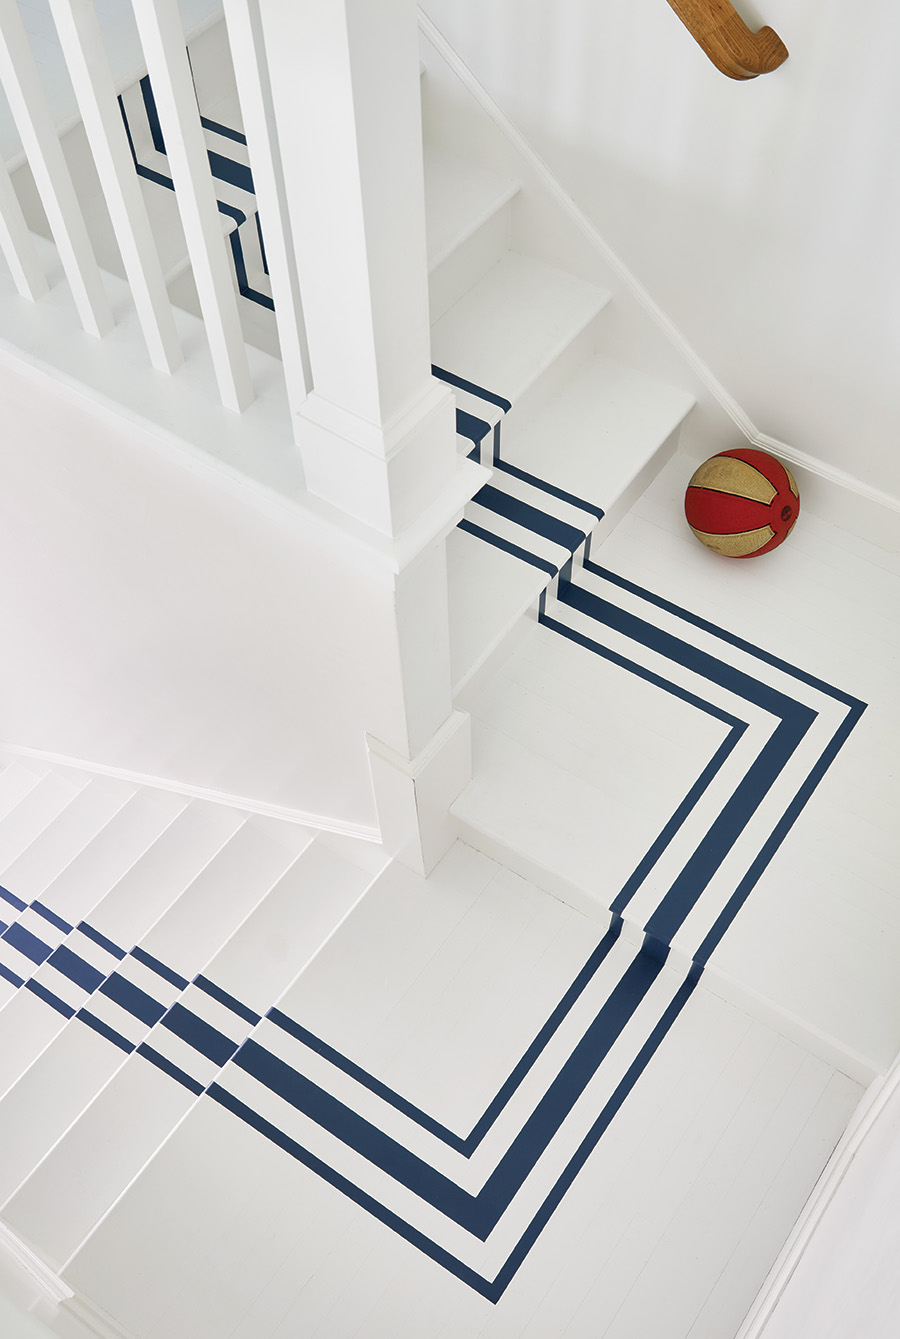 Chessin commissioned Connecticut-based decorative art firm Deux Femmes to paint a faux runner on the stairs.